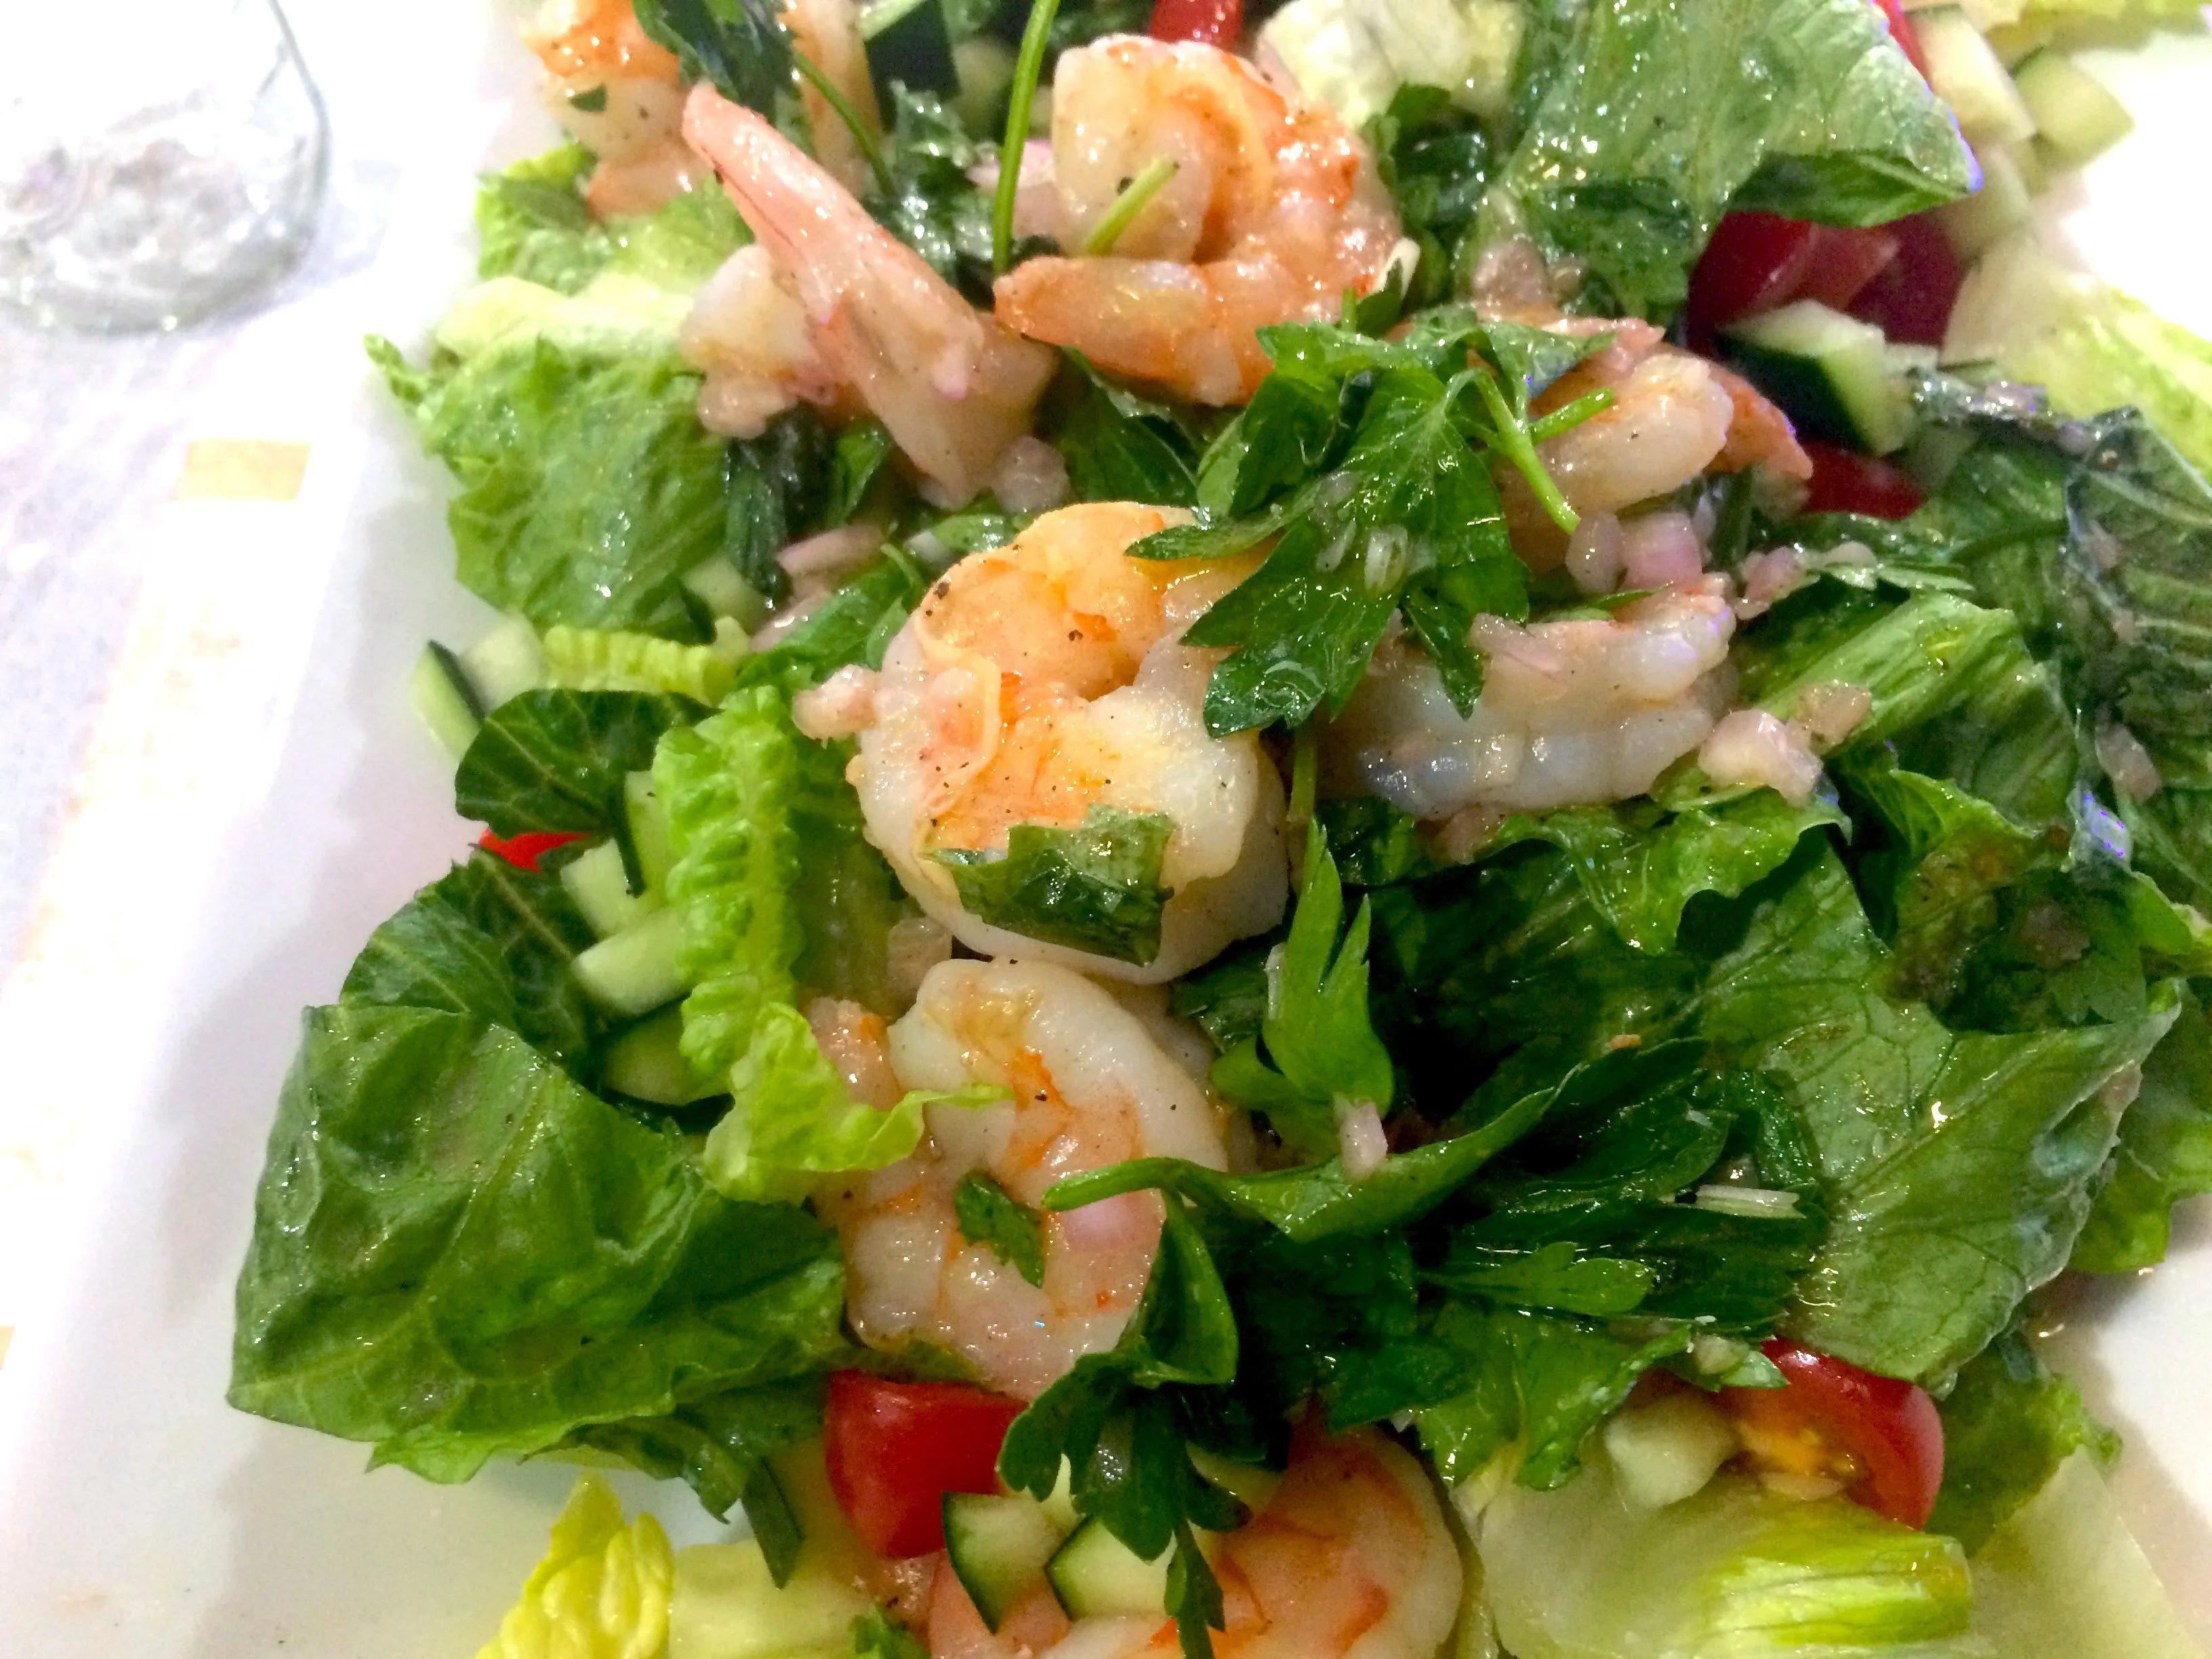 Shrimp Salad With Lettuce - Resipes my Familly